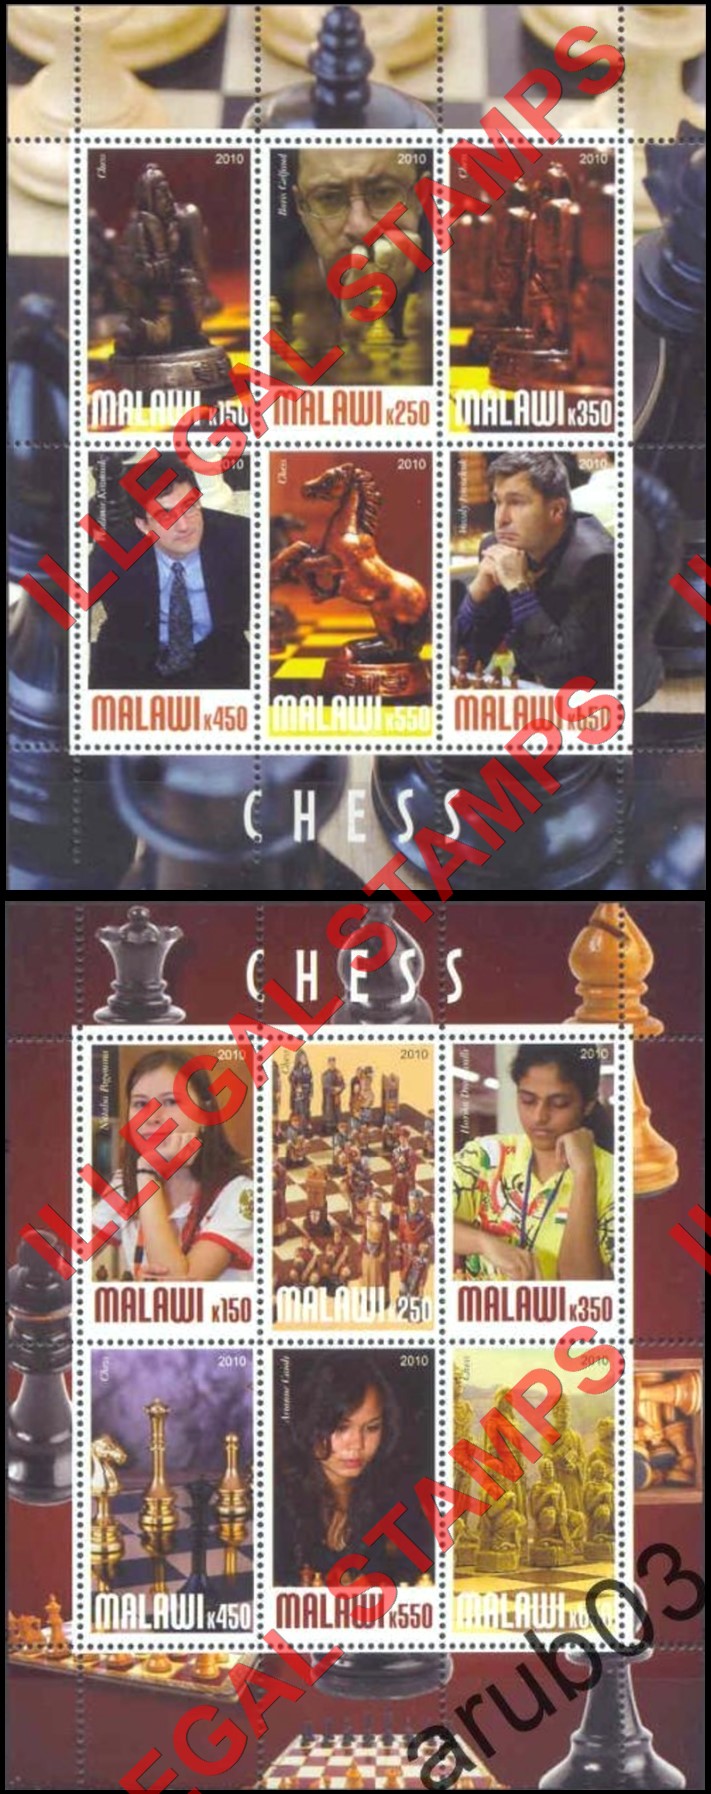 Malawi 2010 Chess Illegal Stamp Souvenir Sheets of 6